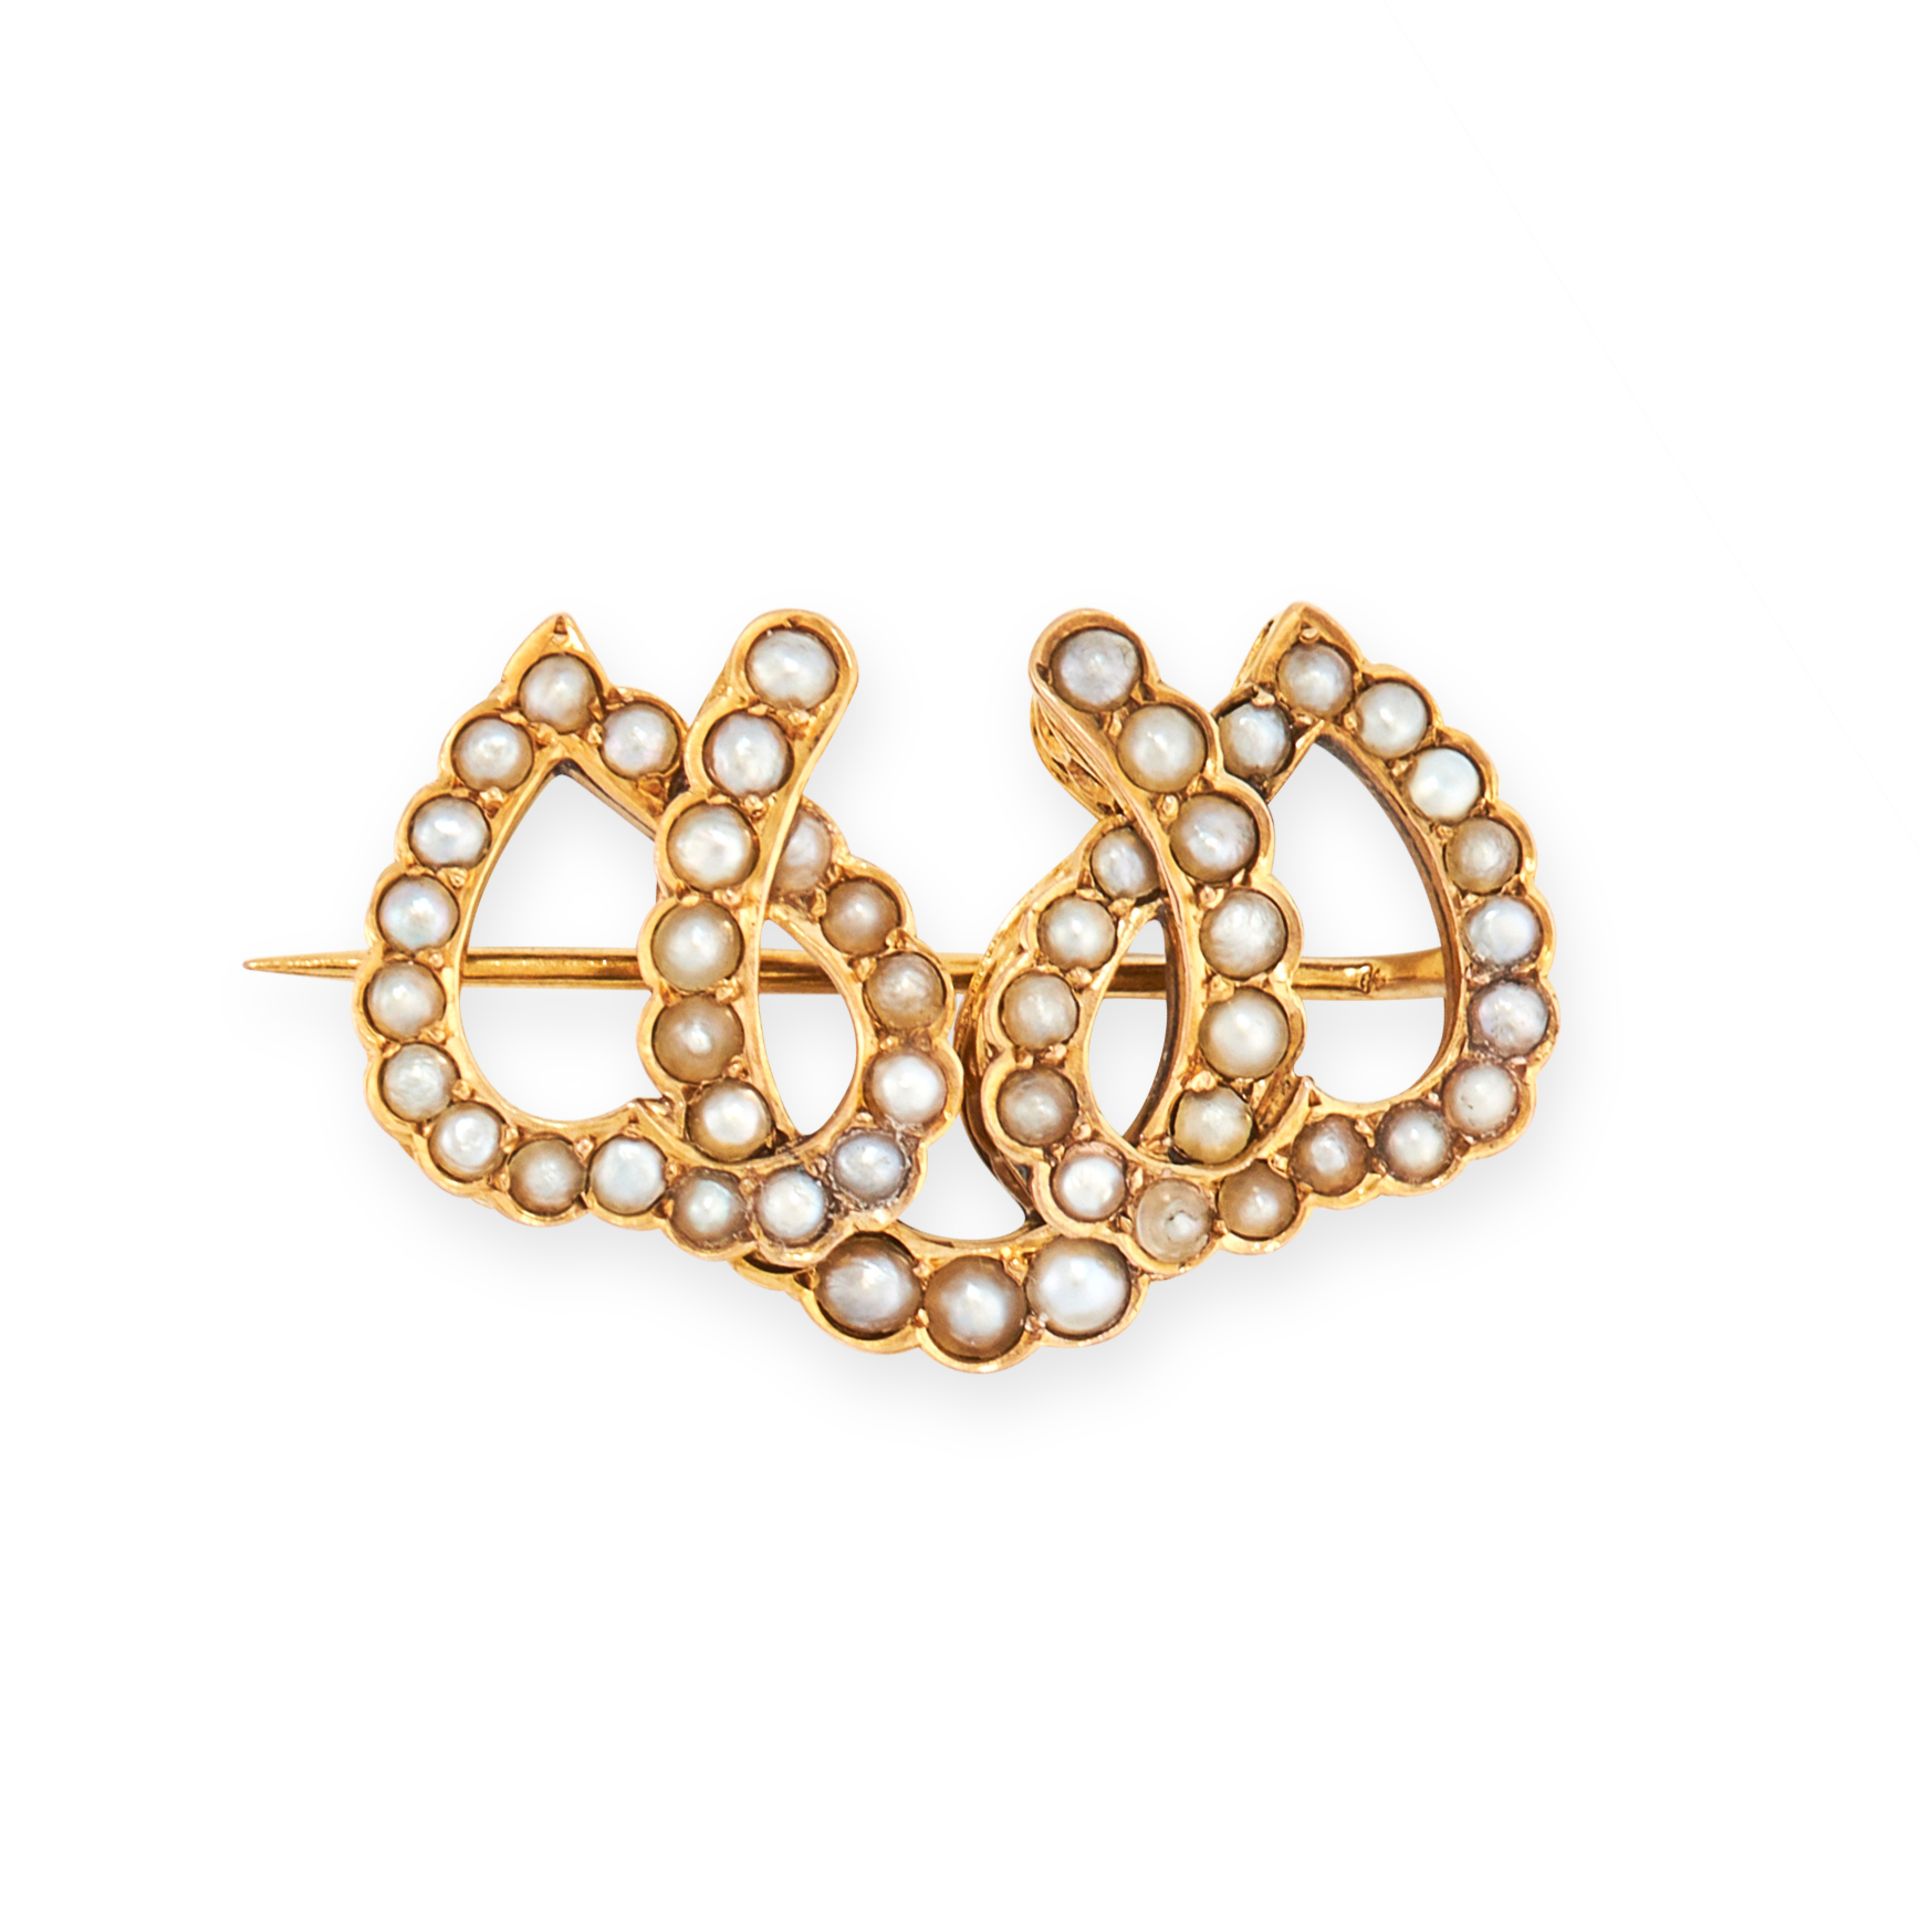 AN ANTIQUE PEARL BROOCH, 19TH CENTURY in yellow gold, designed as three interlocking horseshoes